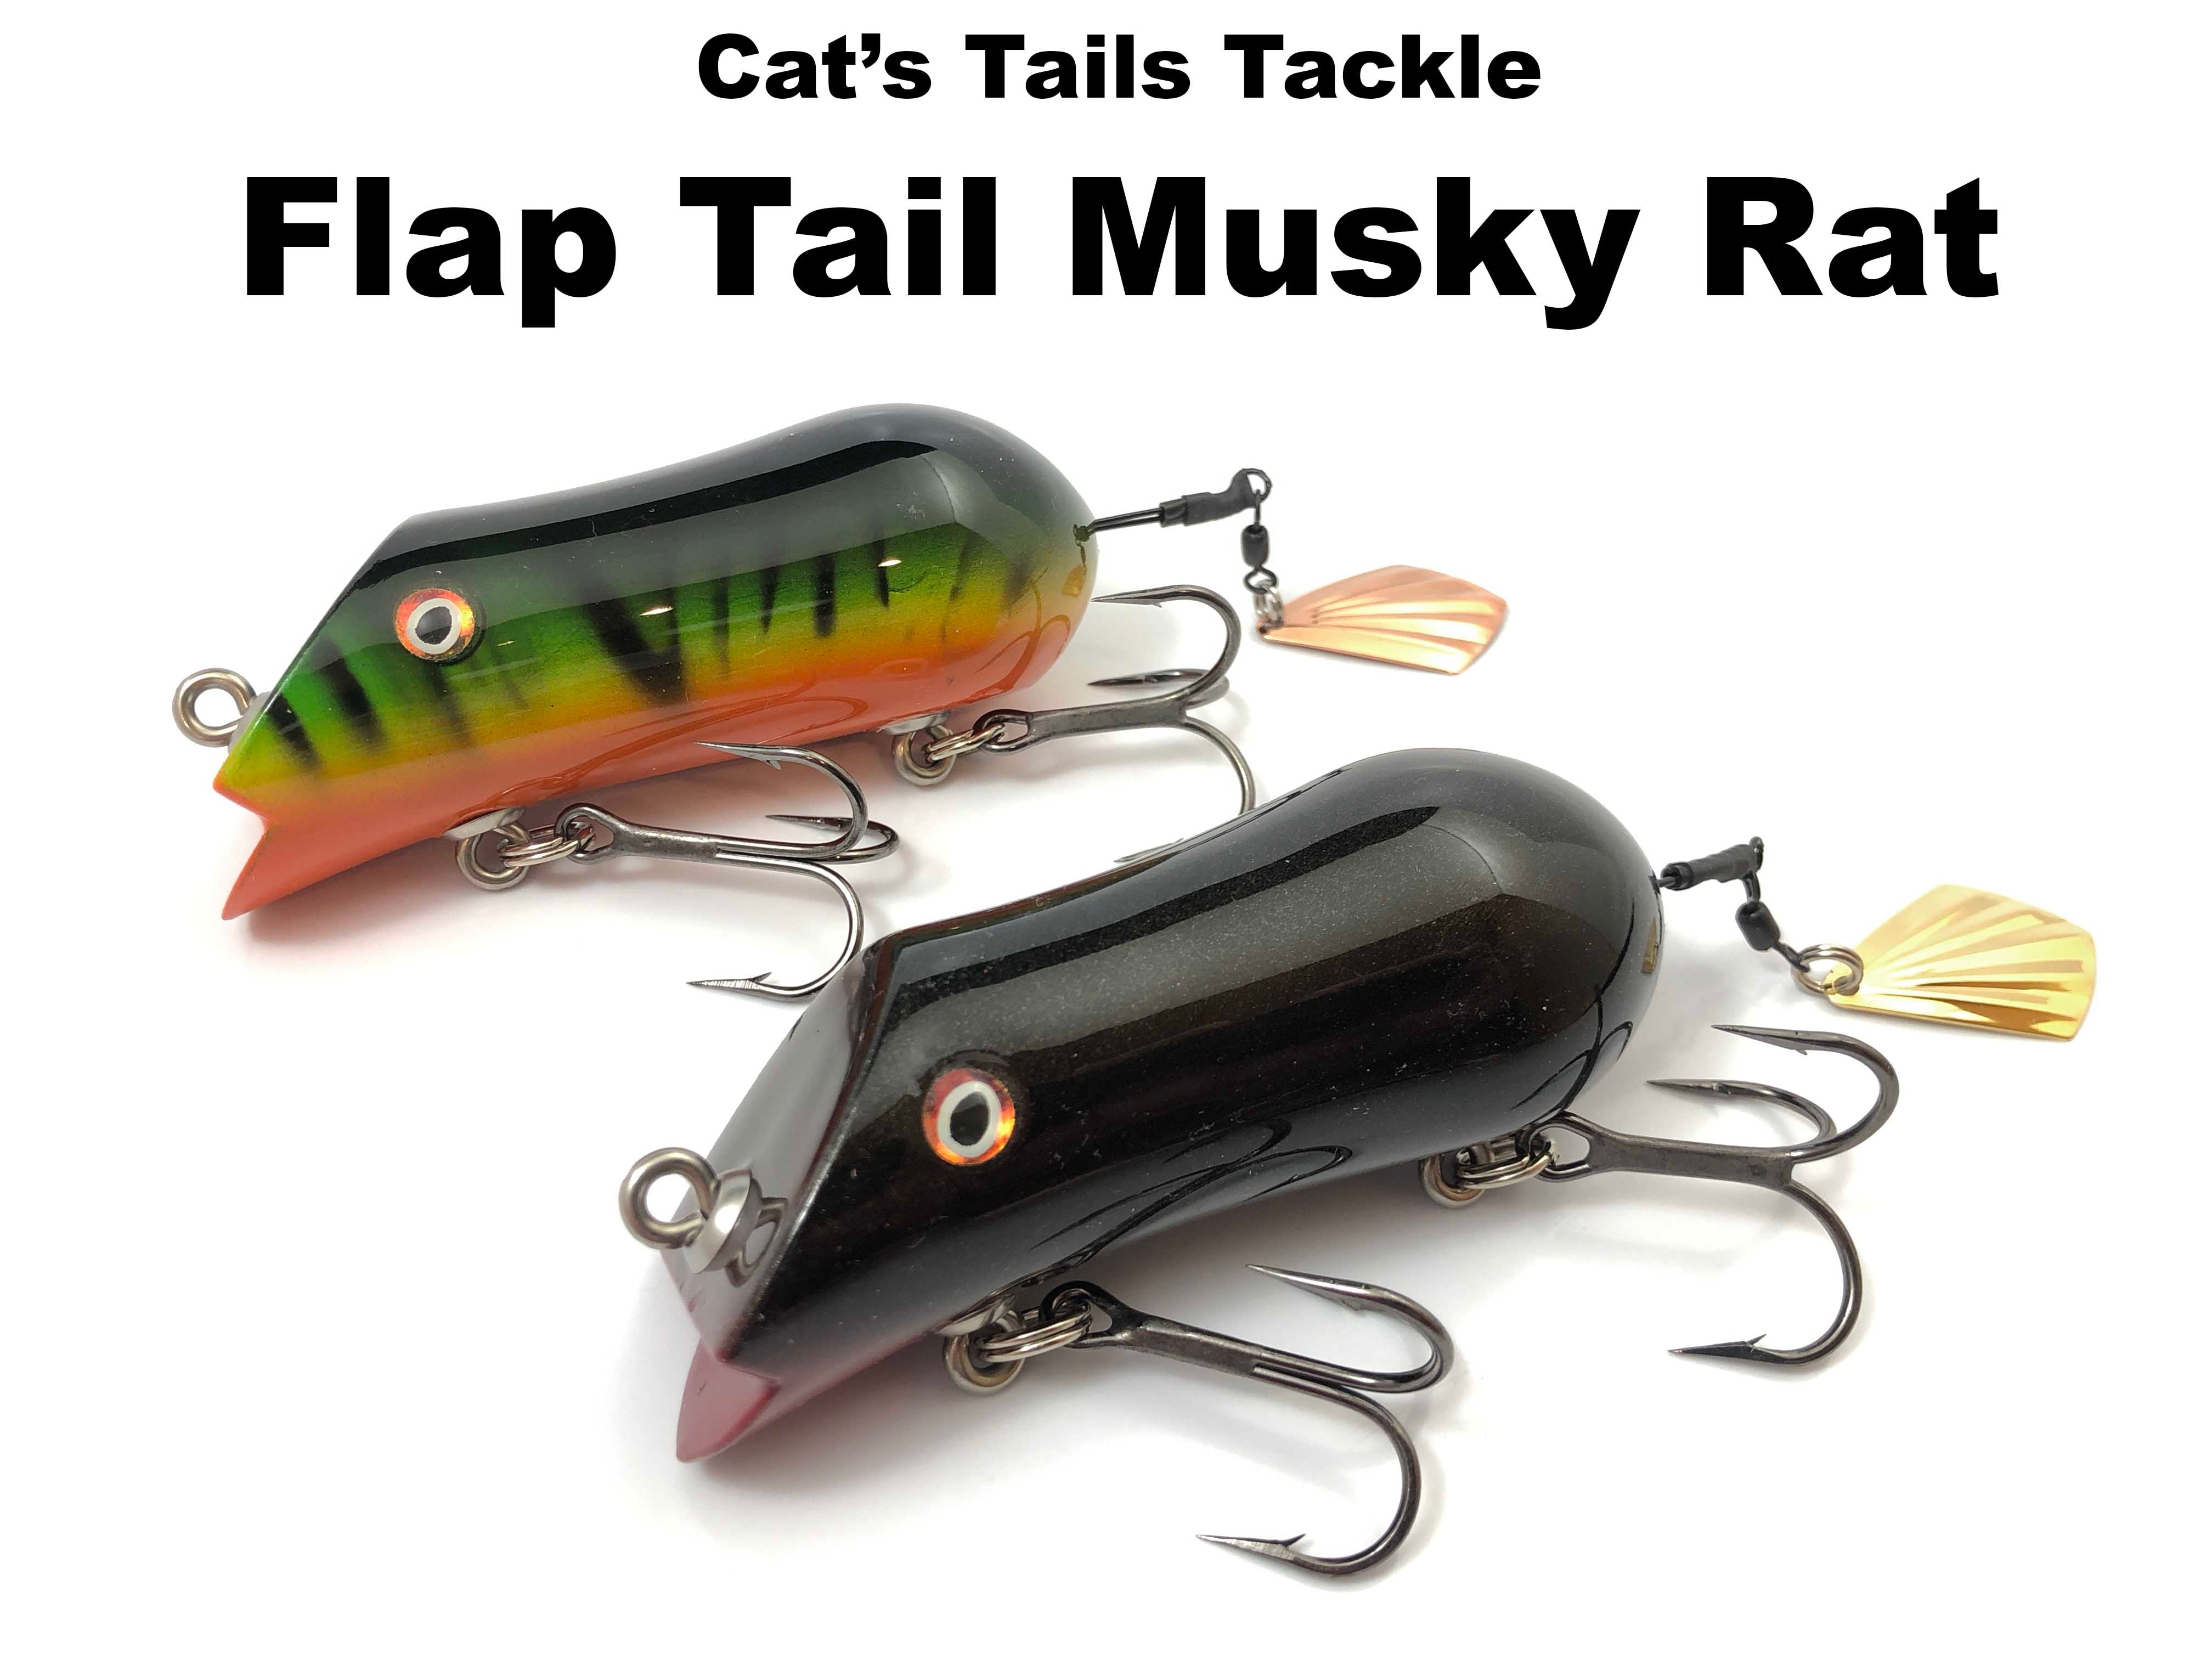 Shakespeare Musky Trolling Minnow Lure - Fin & Flame